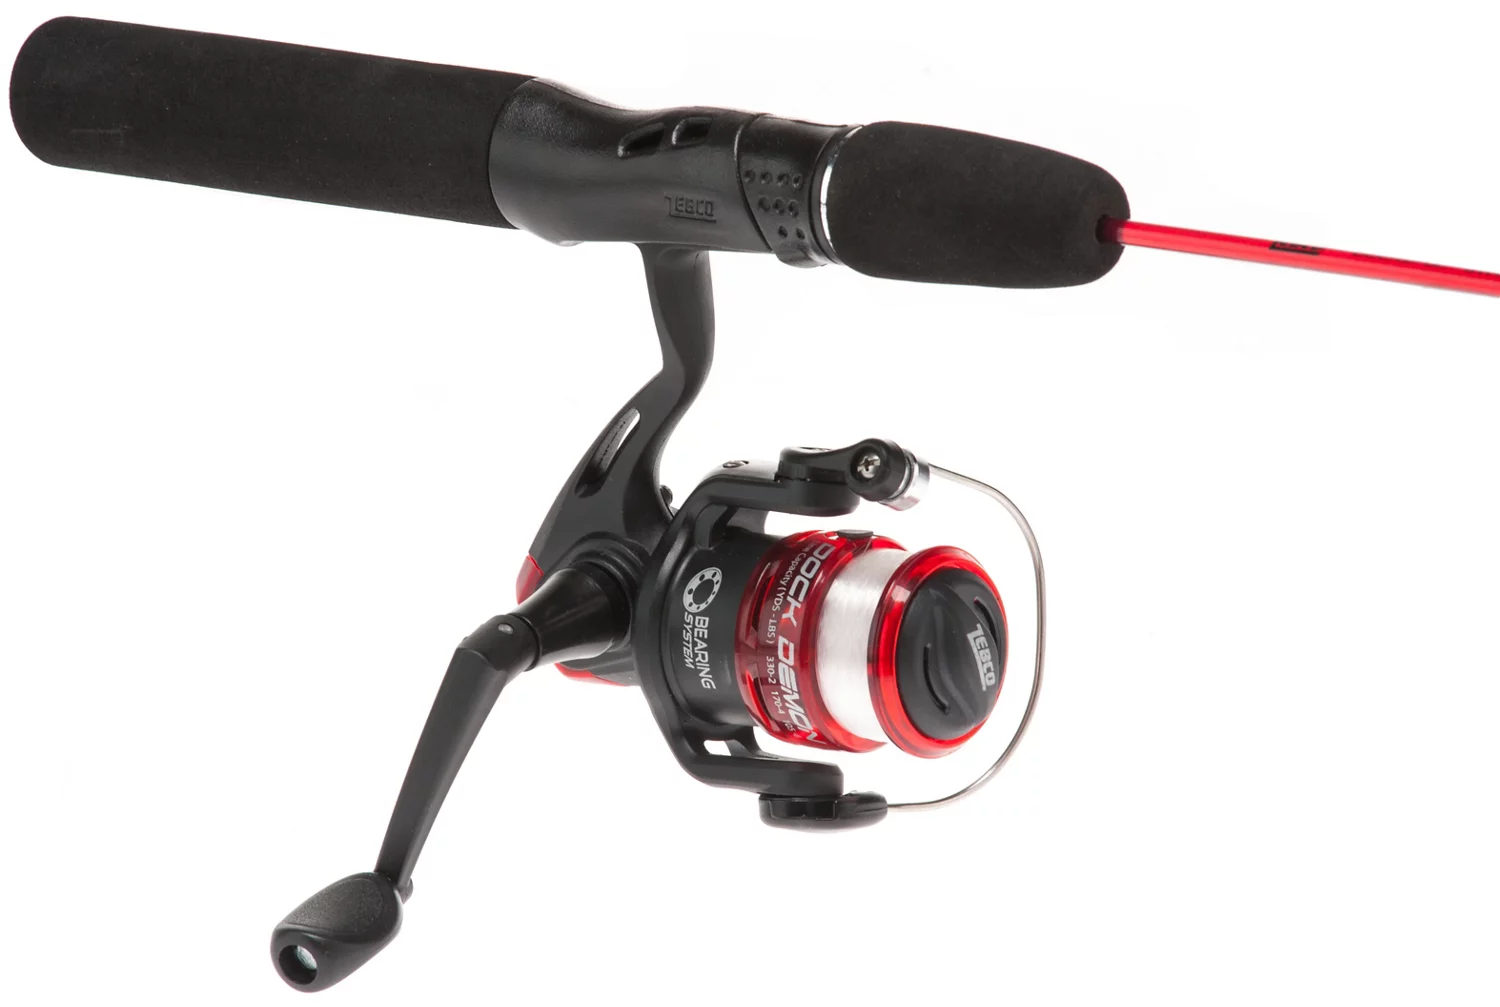 Zebco Dock Demon 2'6" Freshwater Spinning Rod and Reel